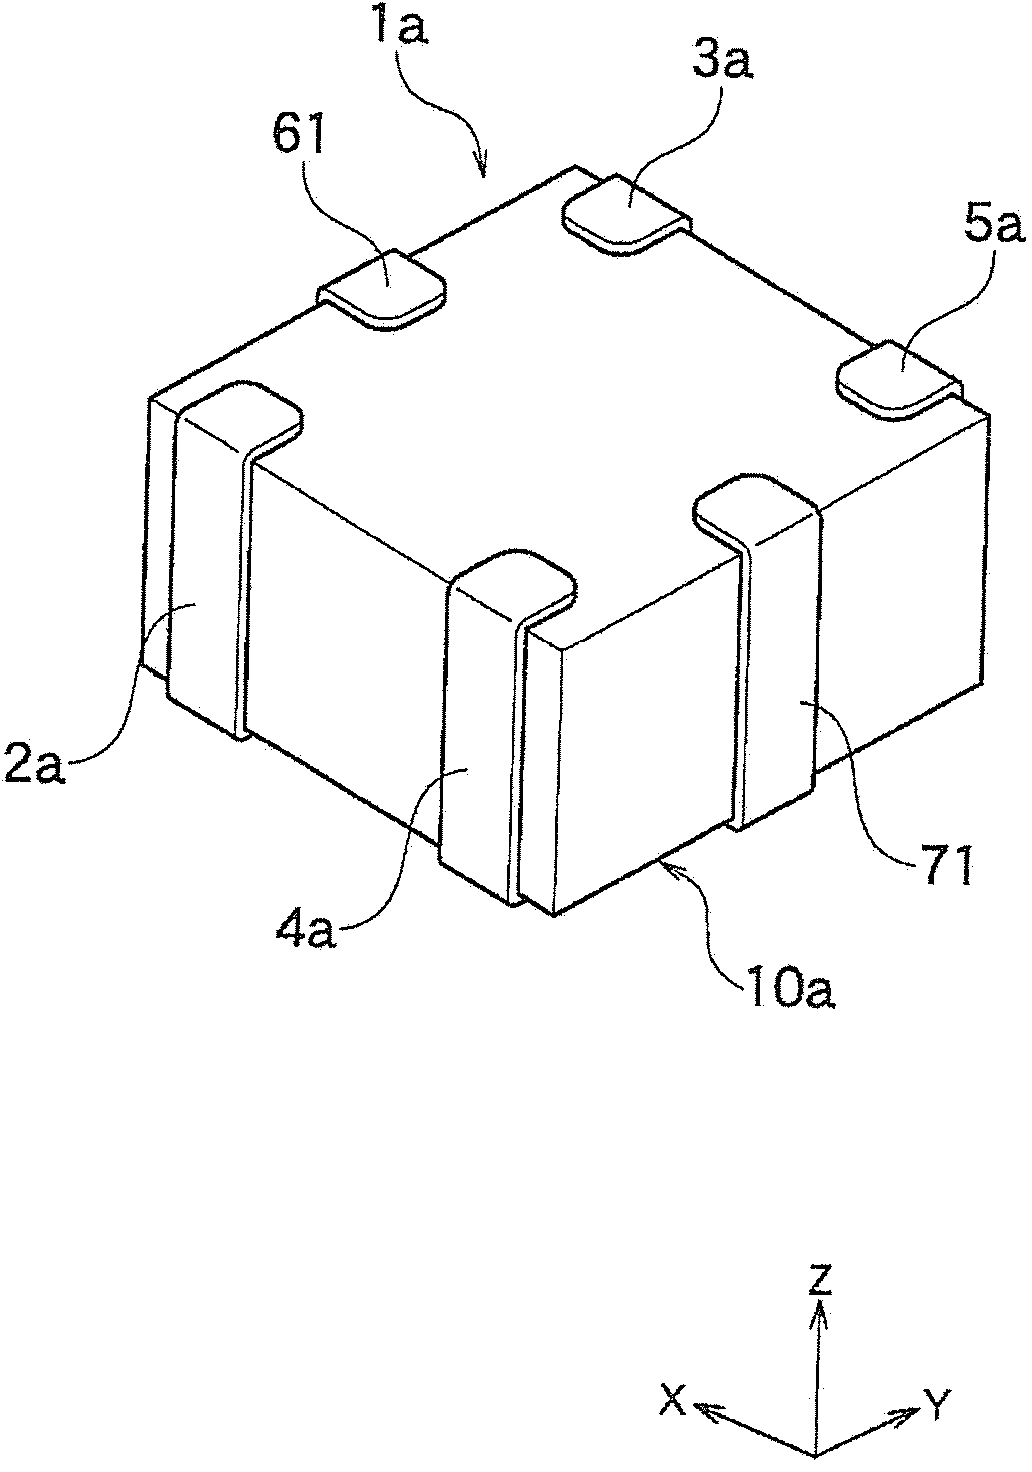 Dielectric ceramic composition, electronic element and composite electric element